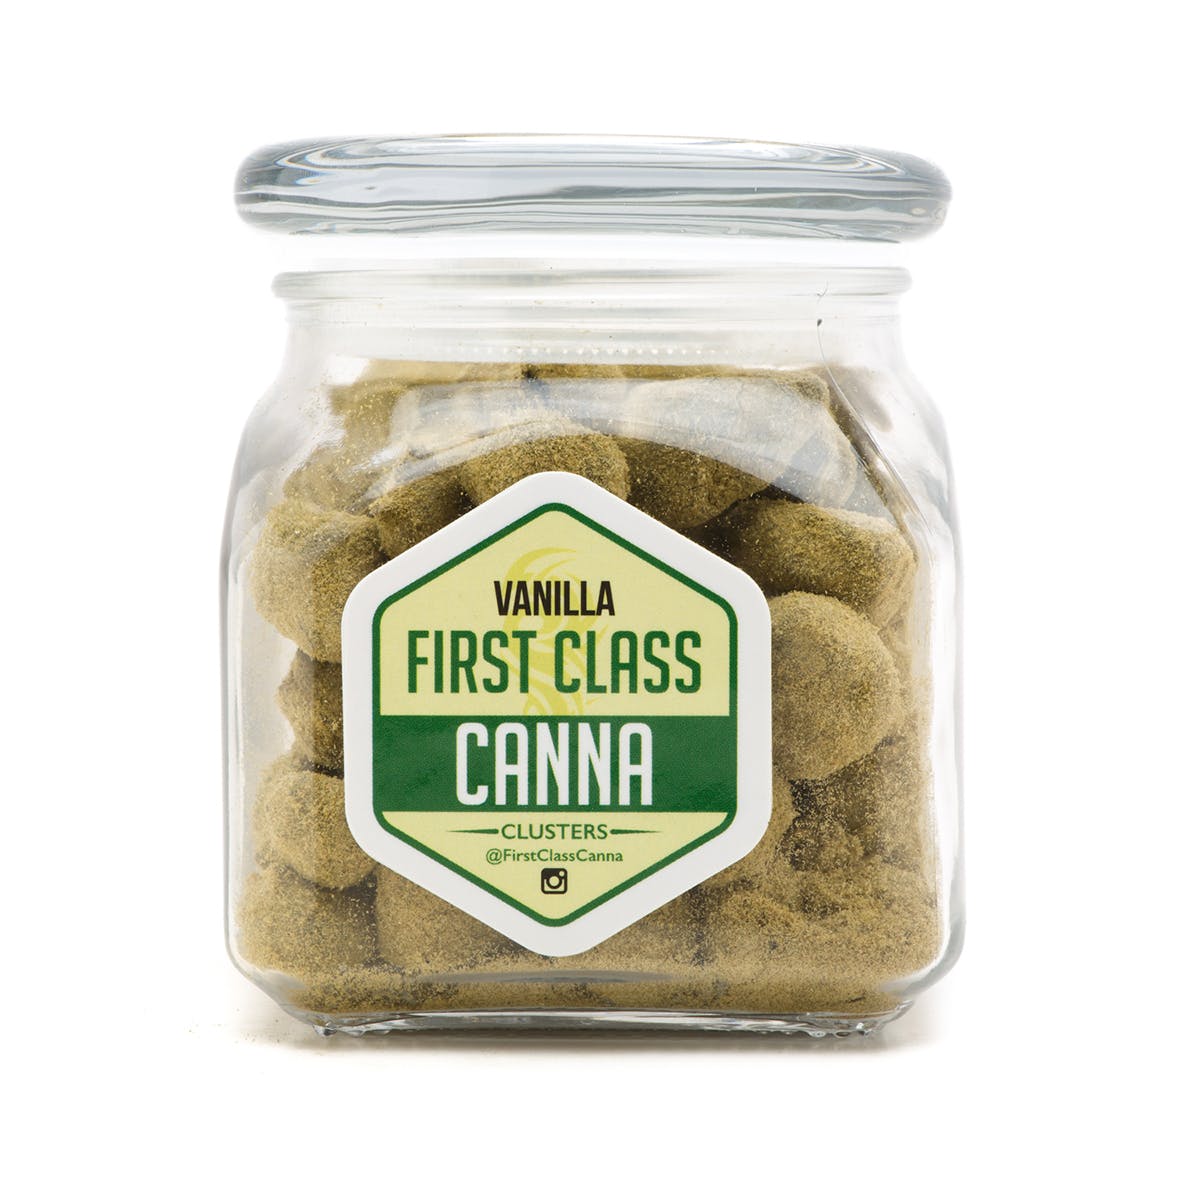 indica-first-class-canna-vanilla-canna-clusters